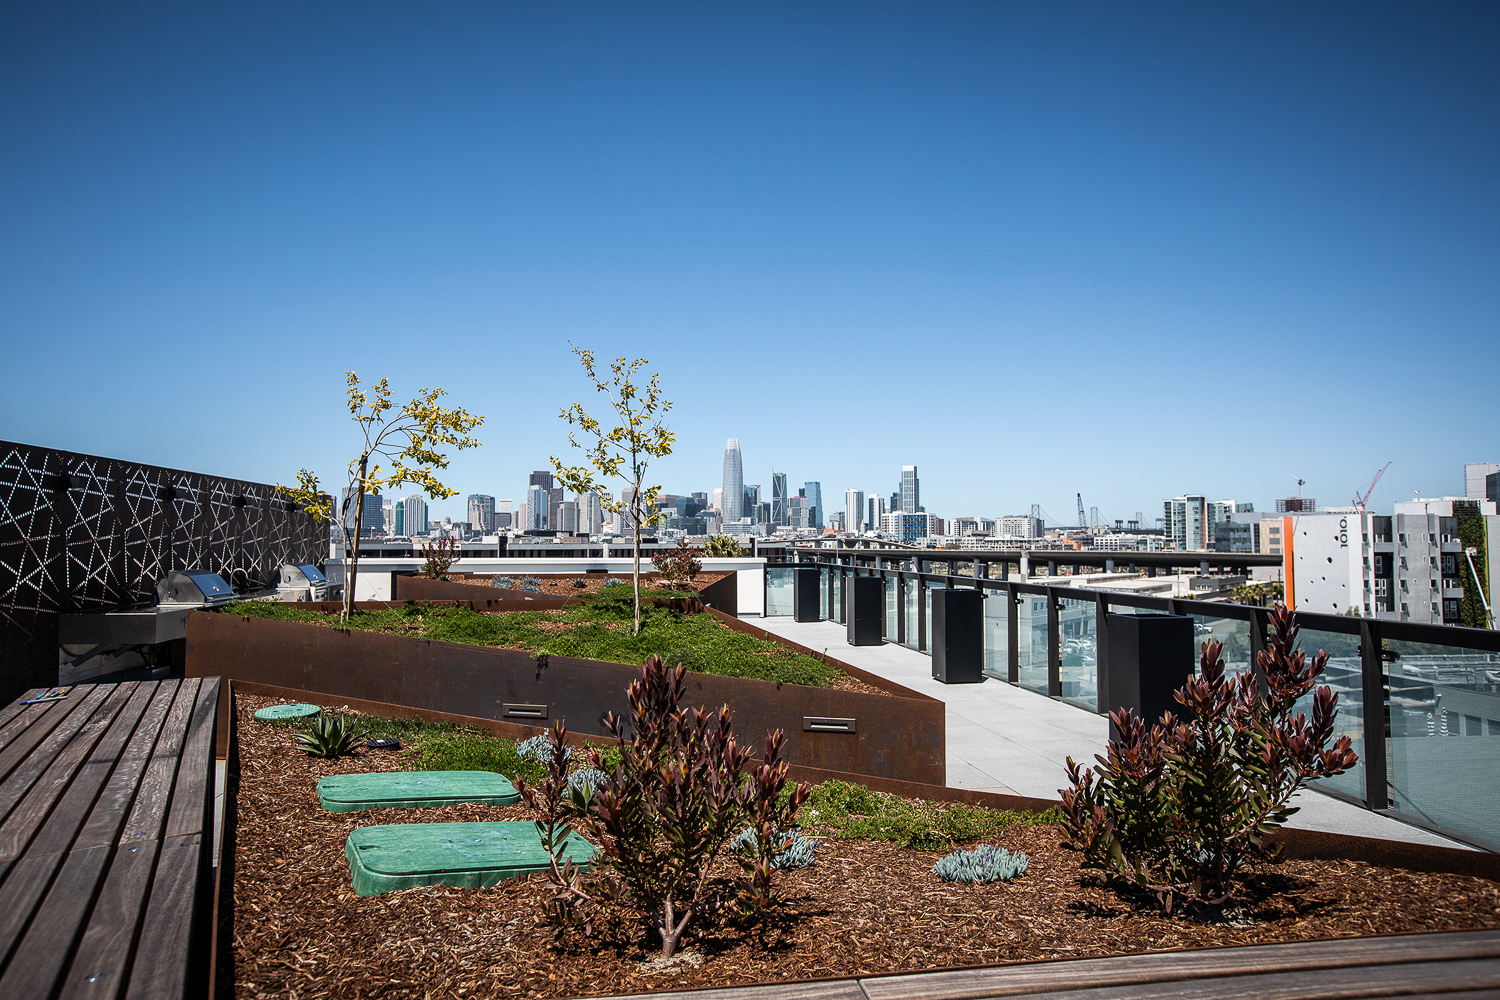 88 at The Park rooftop deck, image courtesy First City Development